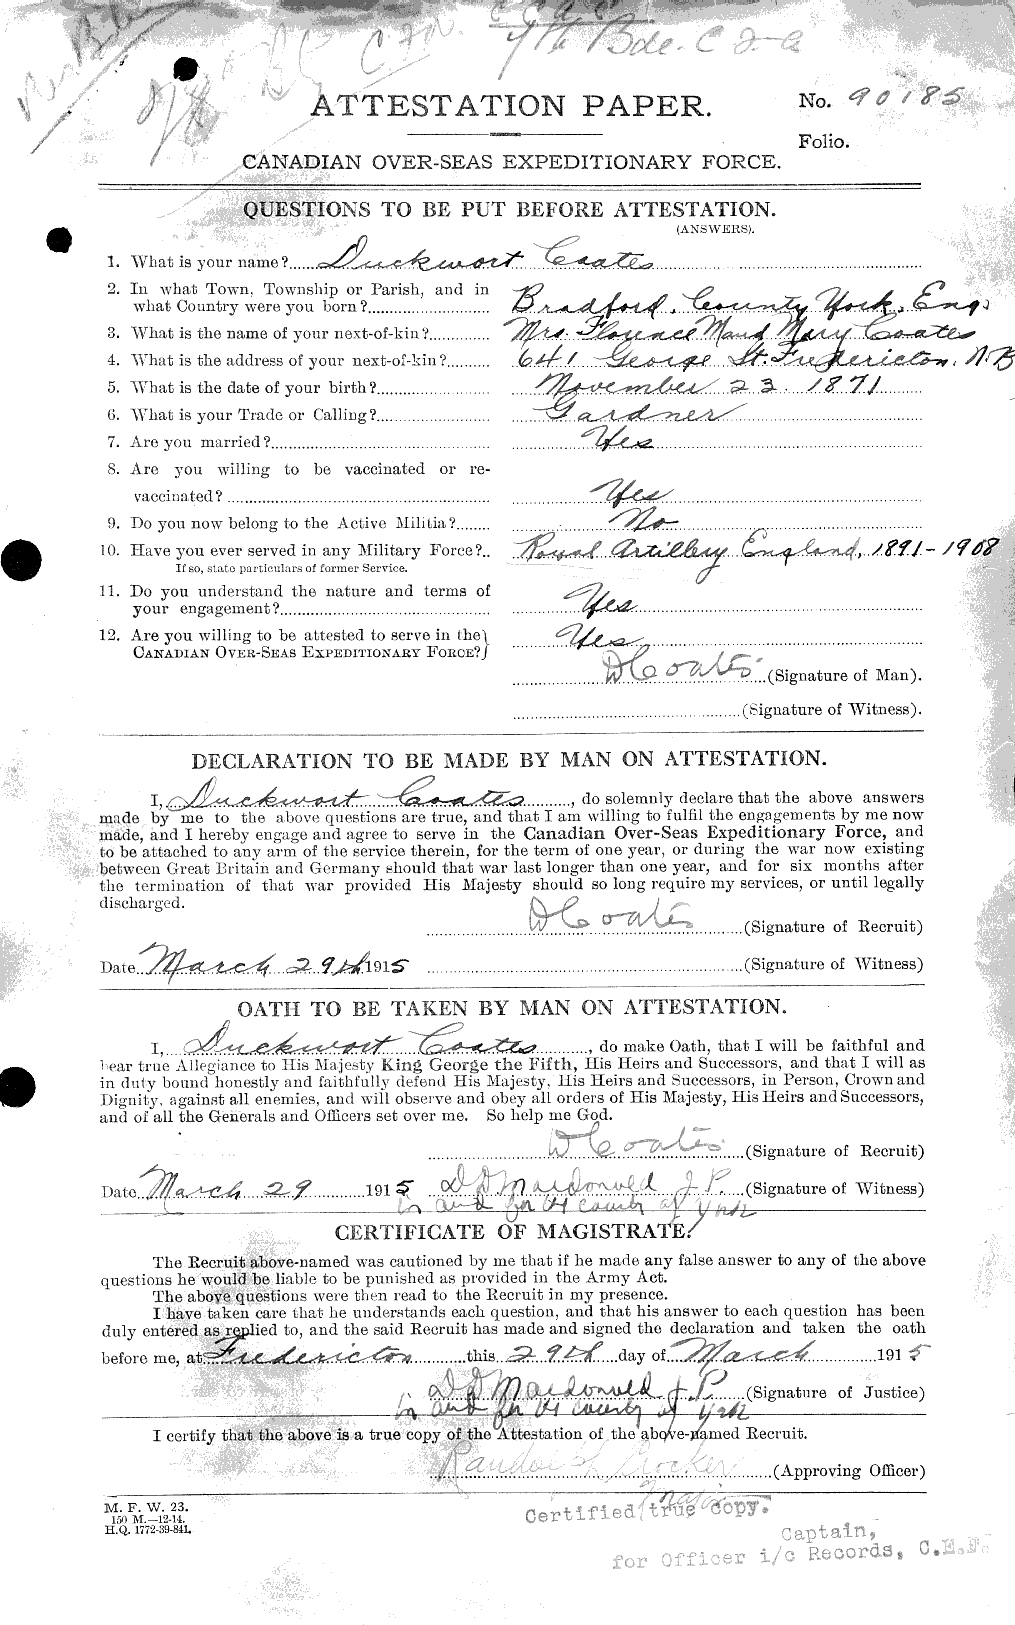 Personnel Records of the First World War - CEF 025610c